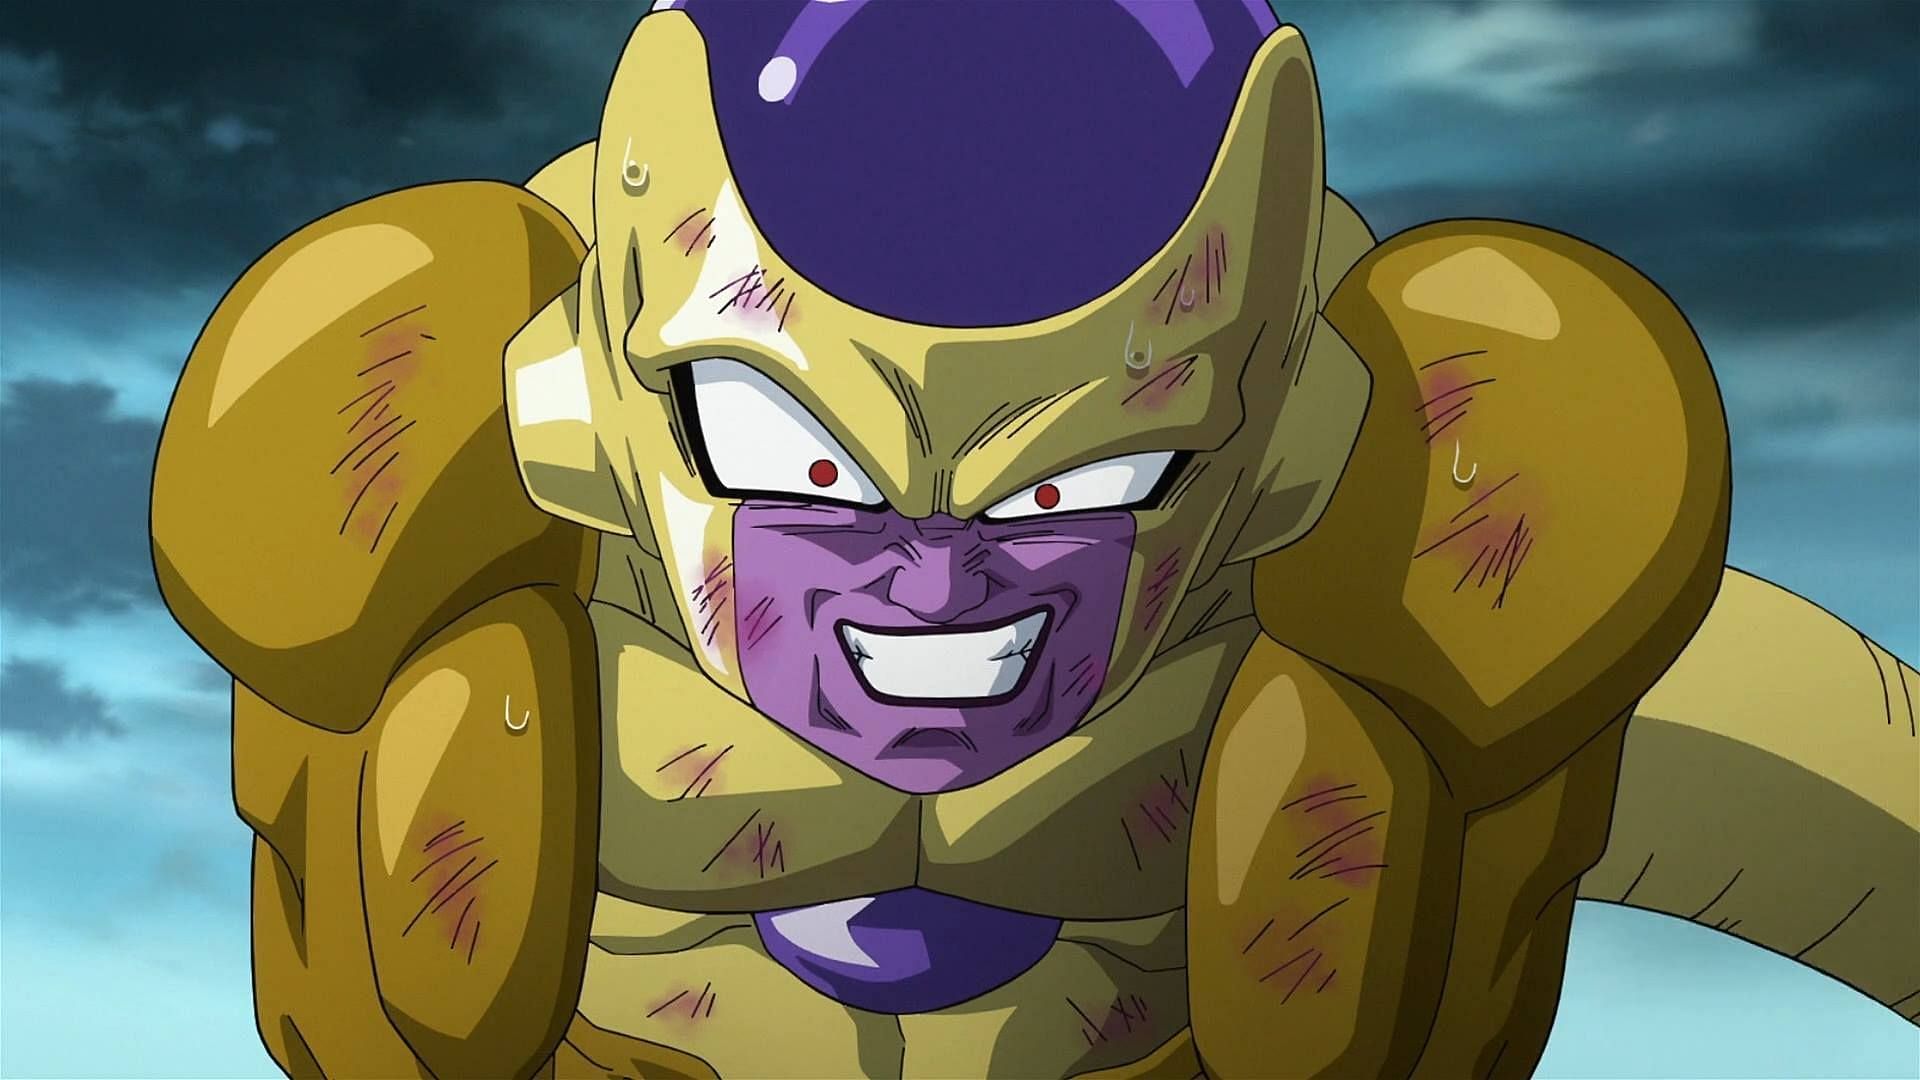 Frieza as seen in the show (Image via Toei Animation)